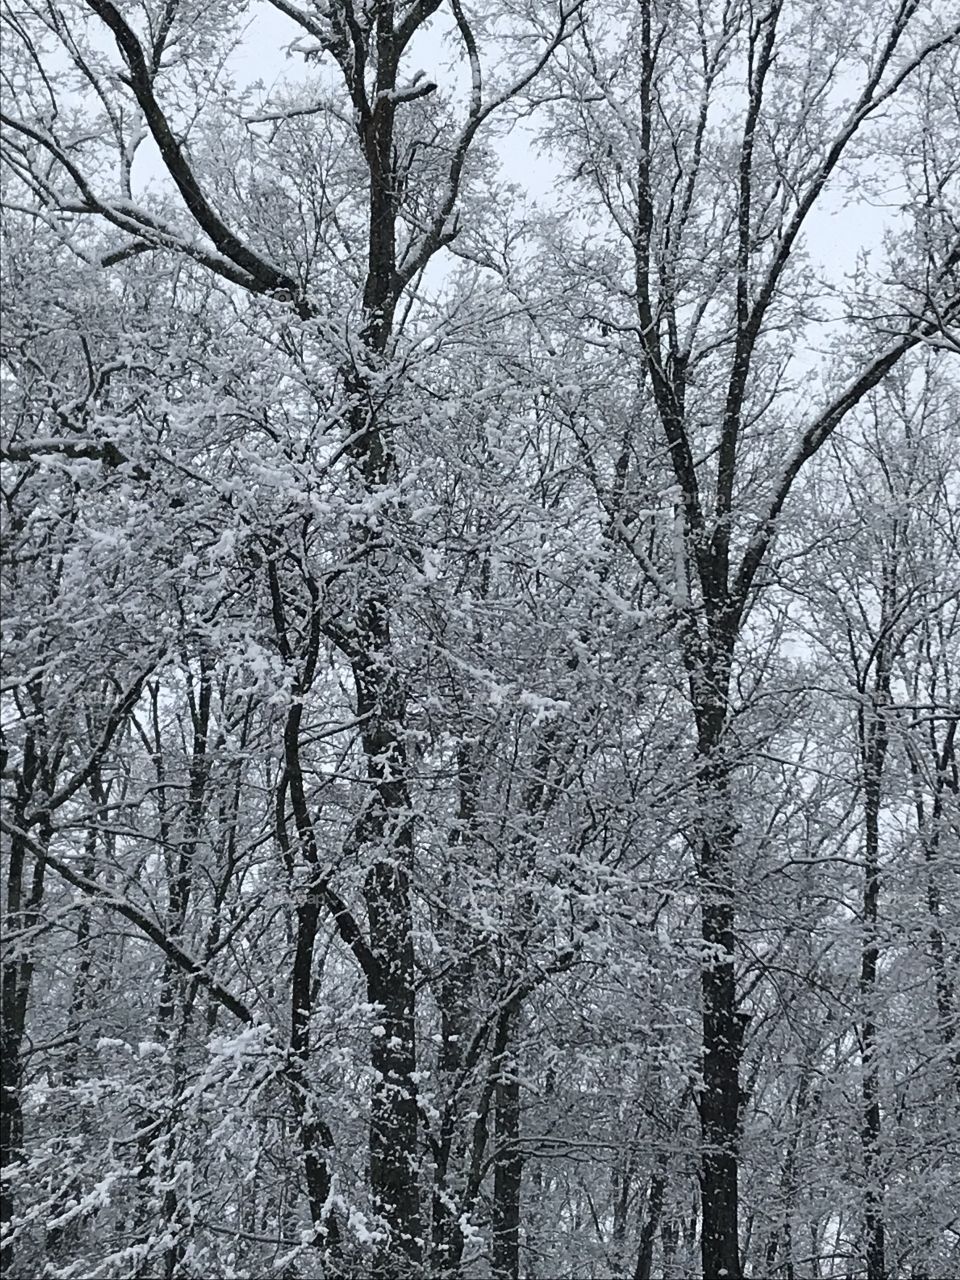 Trees with ice and snow on limbs.  